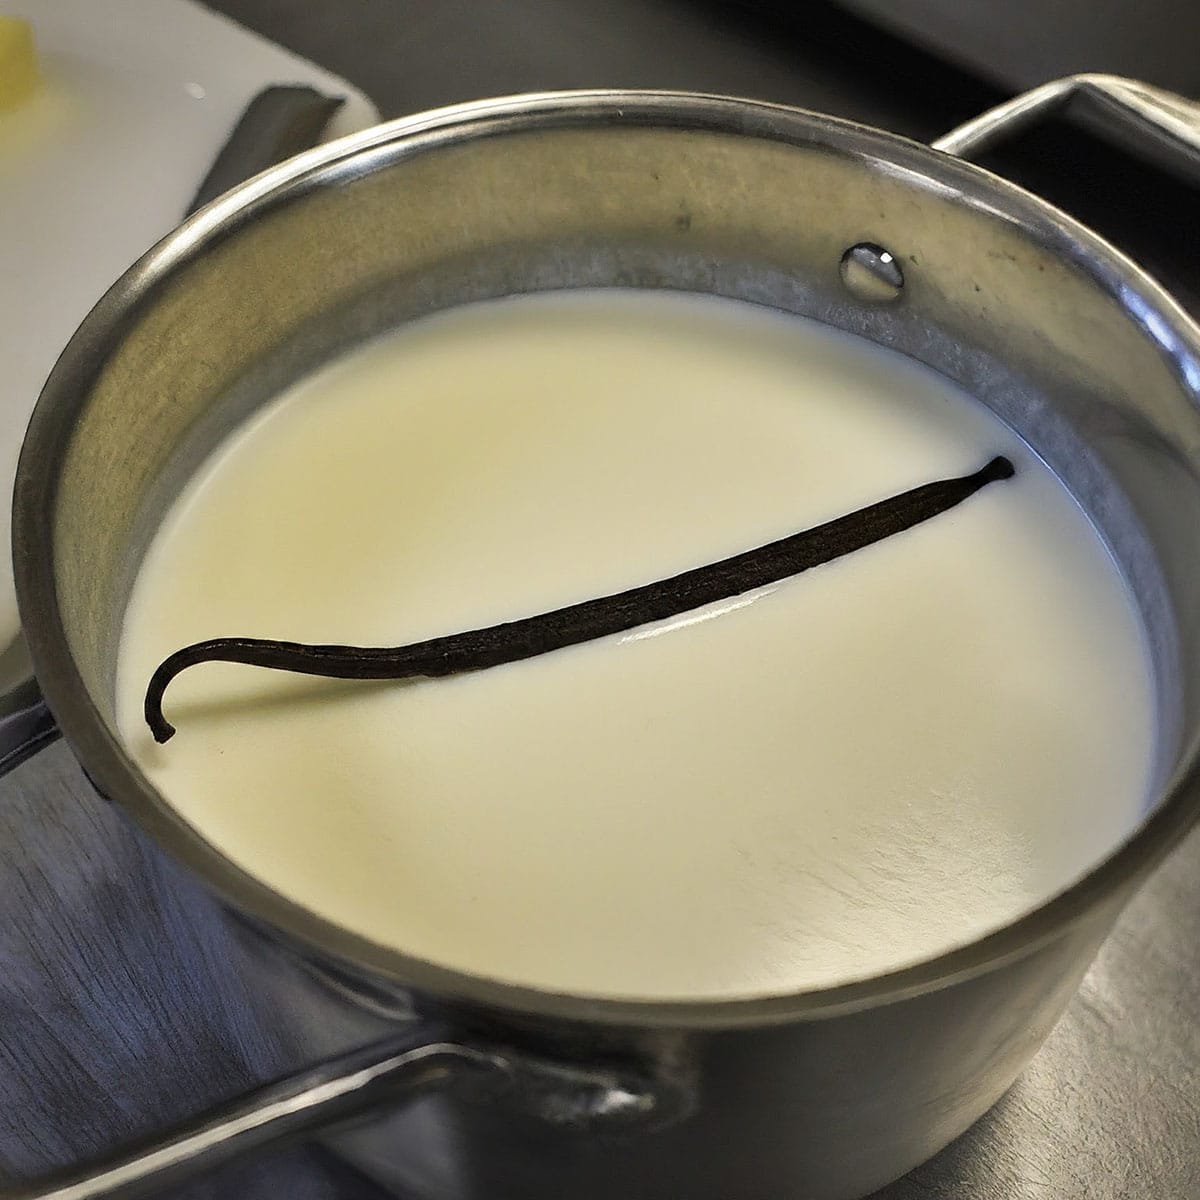 A single vanilla bean pod is steeping in a pot of milk on a stove, visible steam rising from the warm surface.